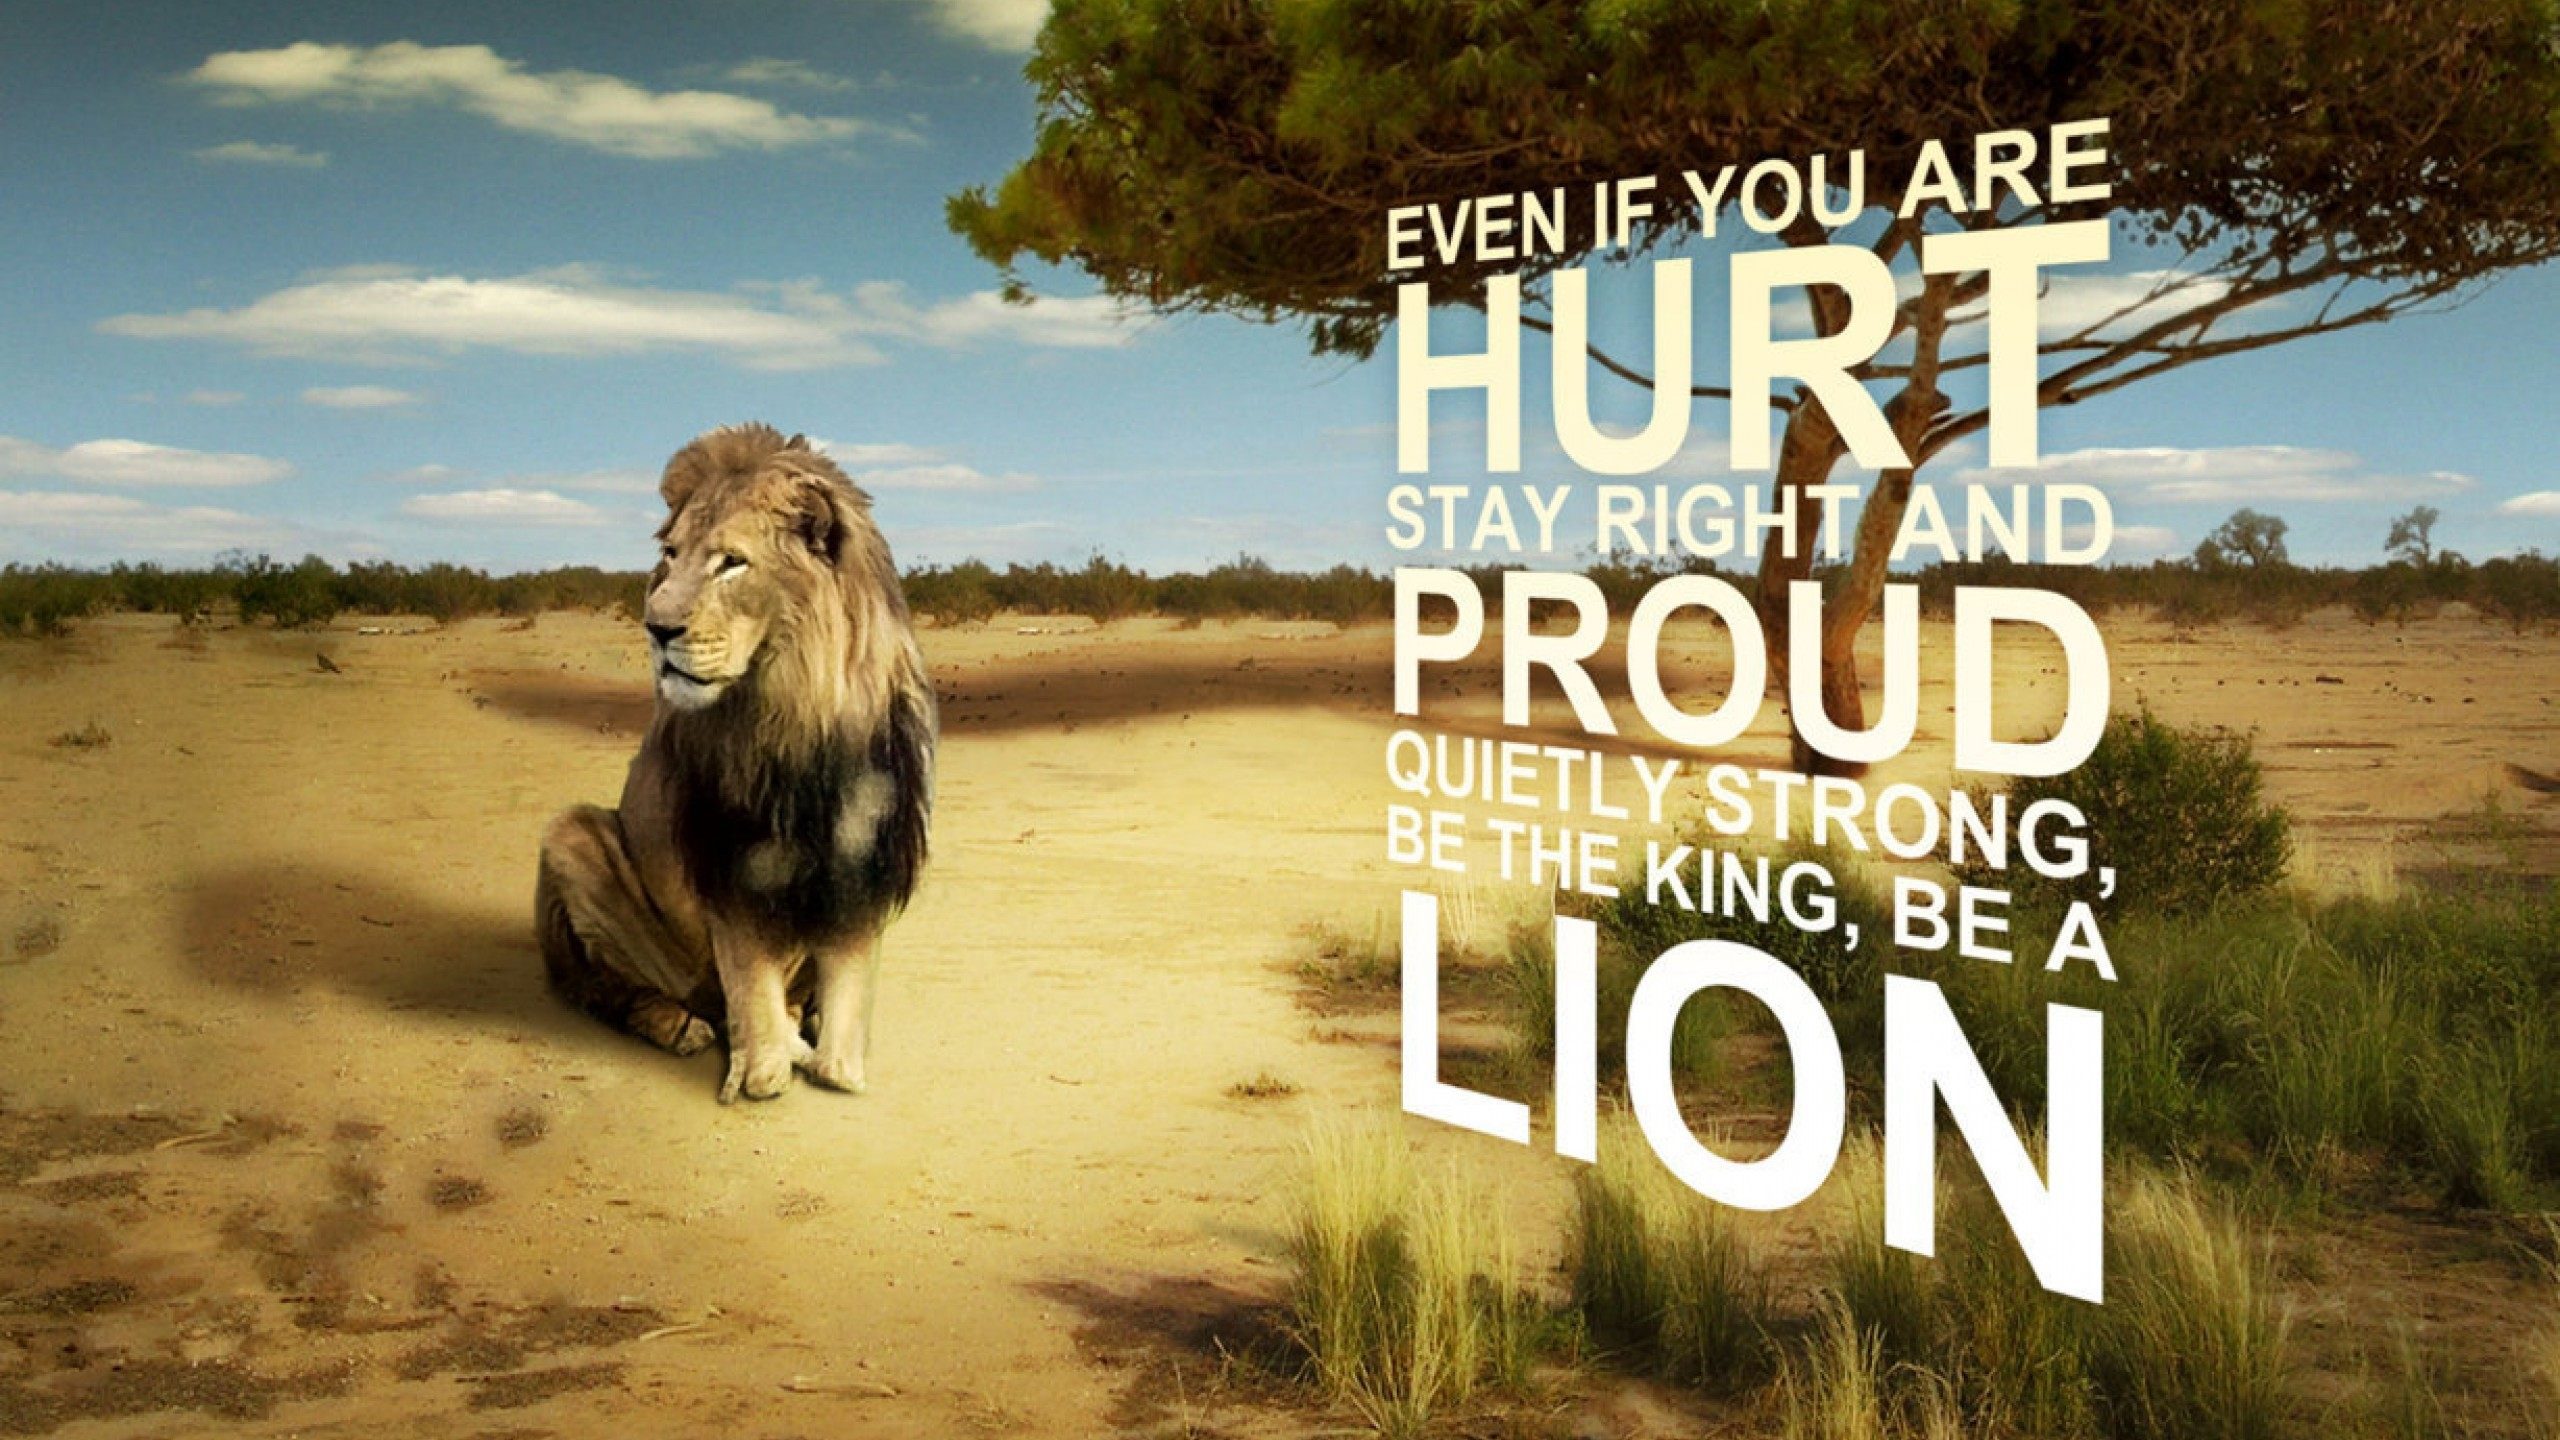 Hd Wallpapers Lion 1080P With Quote - 2560X1440 Wallpaper - Teahub.io